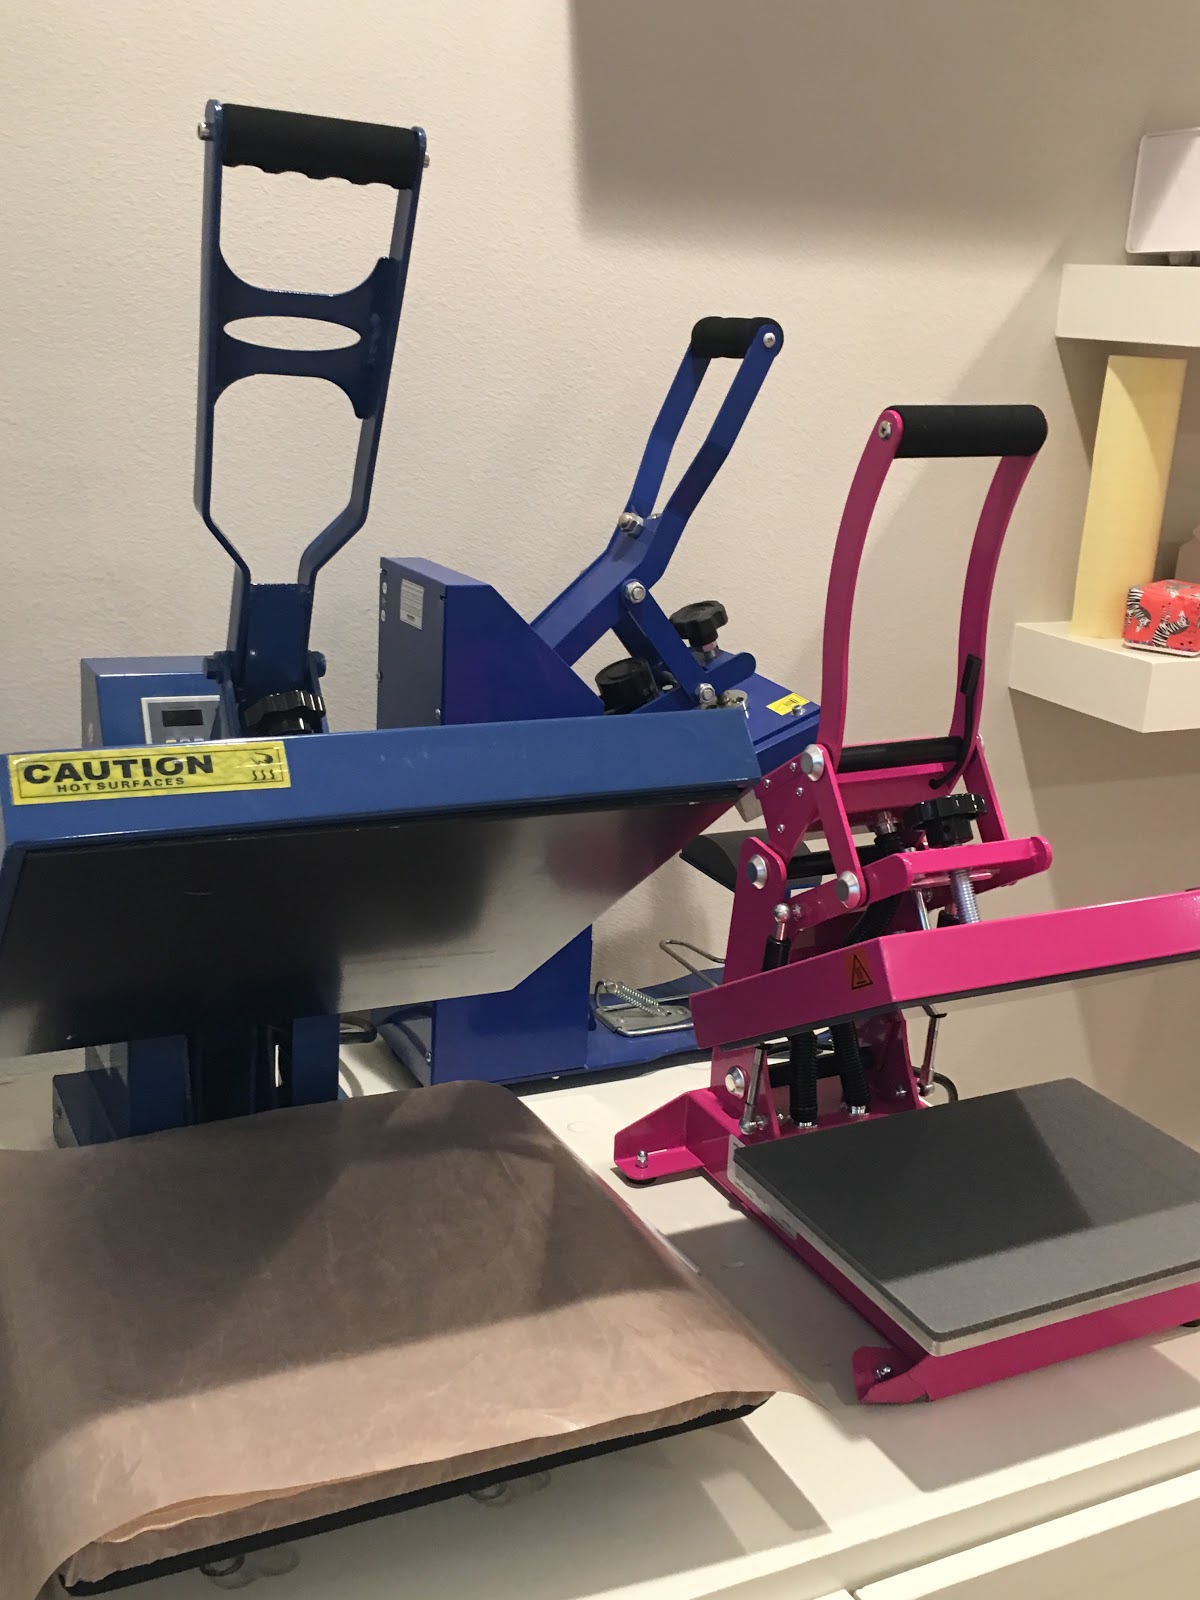 5 Reasons the Pink Heat Press Might Be Perfect for Crafters